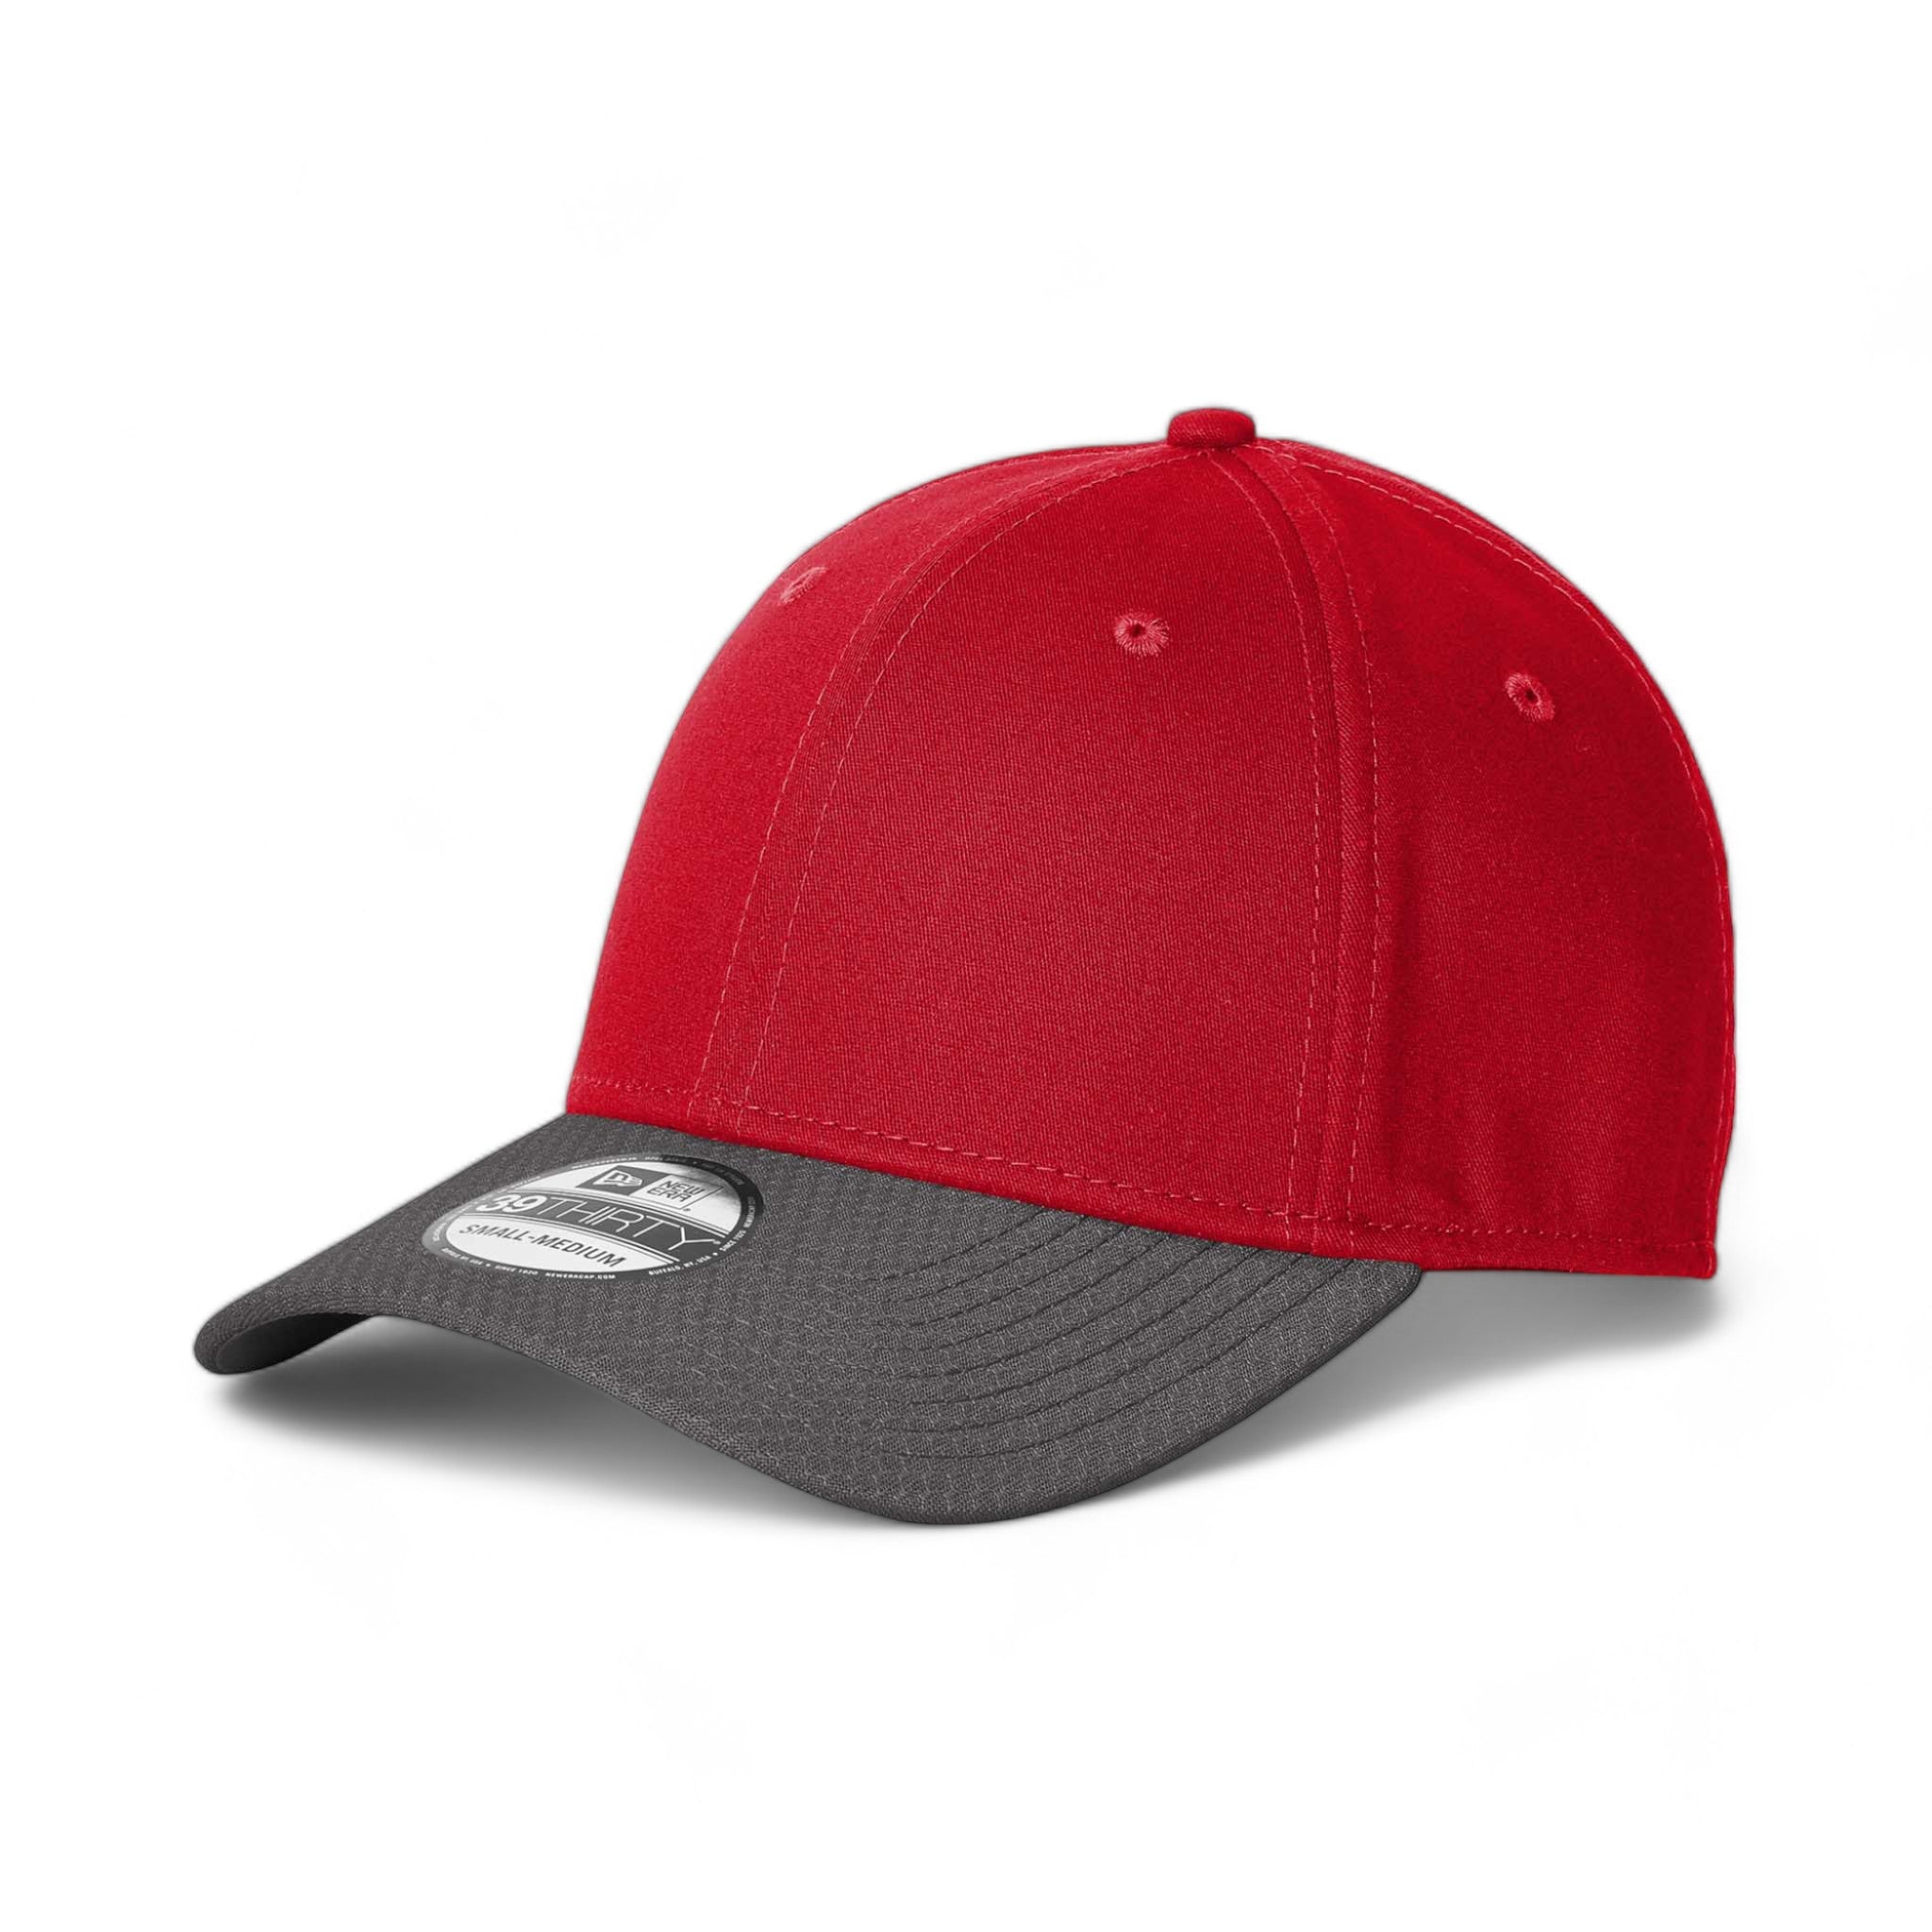 Side view of New Era NE1122 custom hat in scarlet and graphite